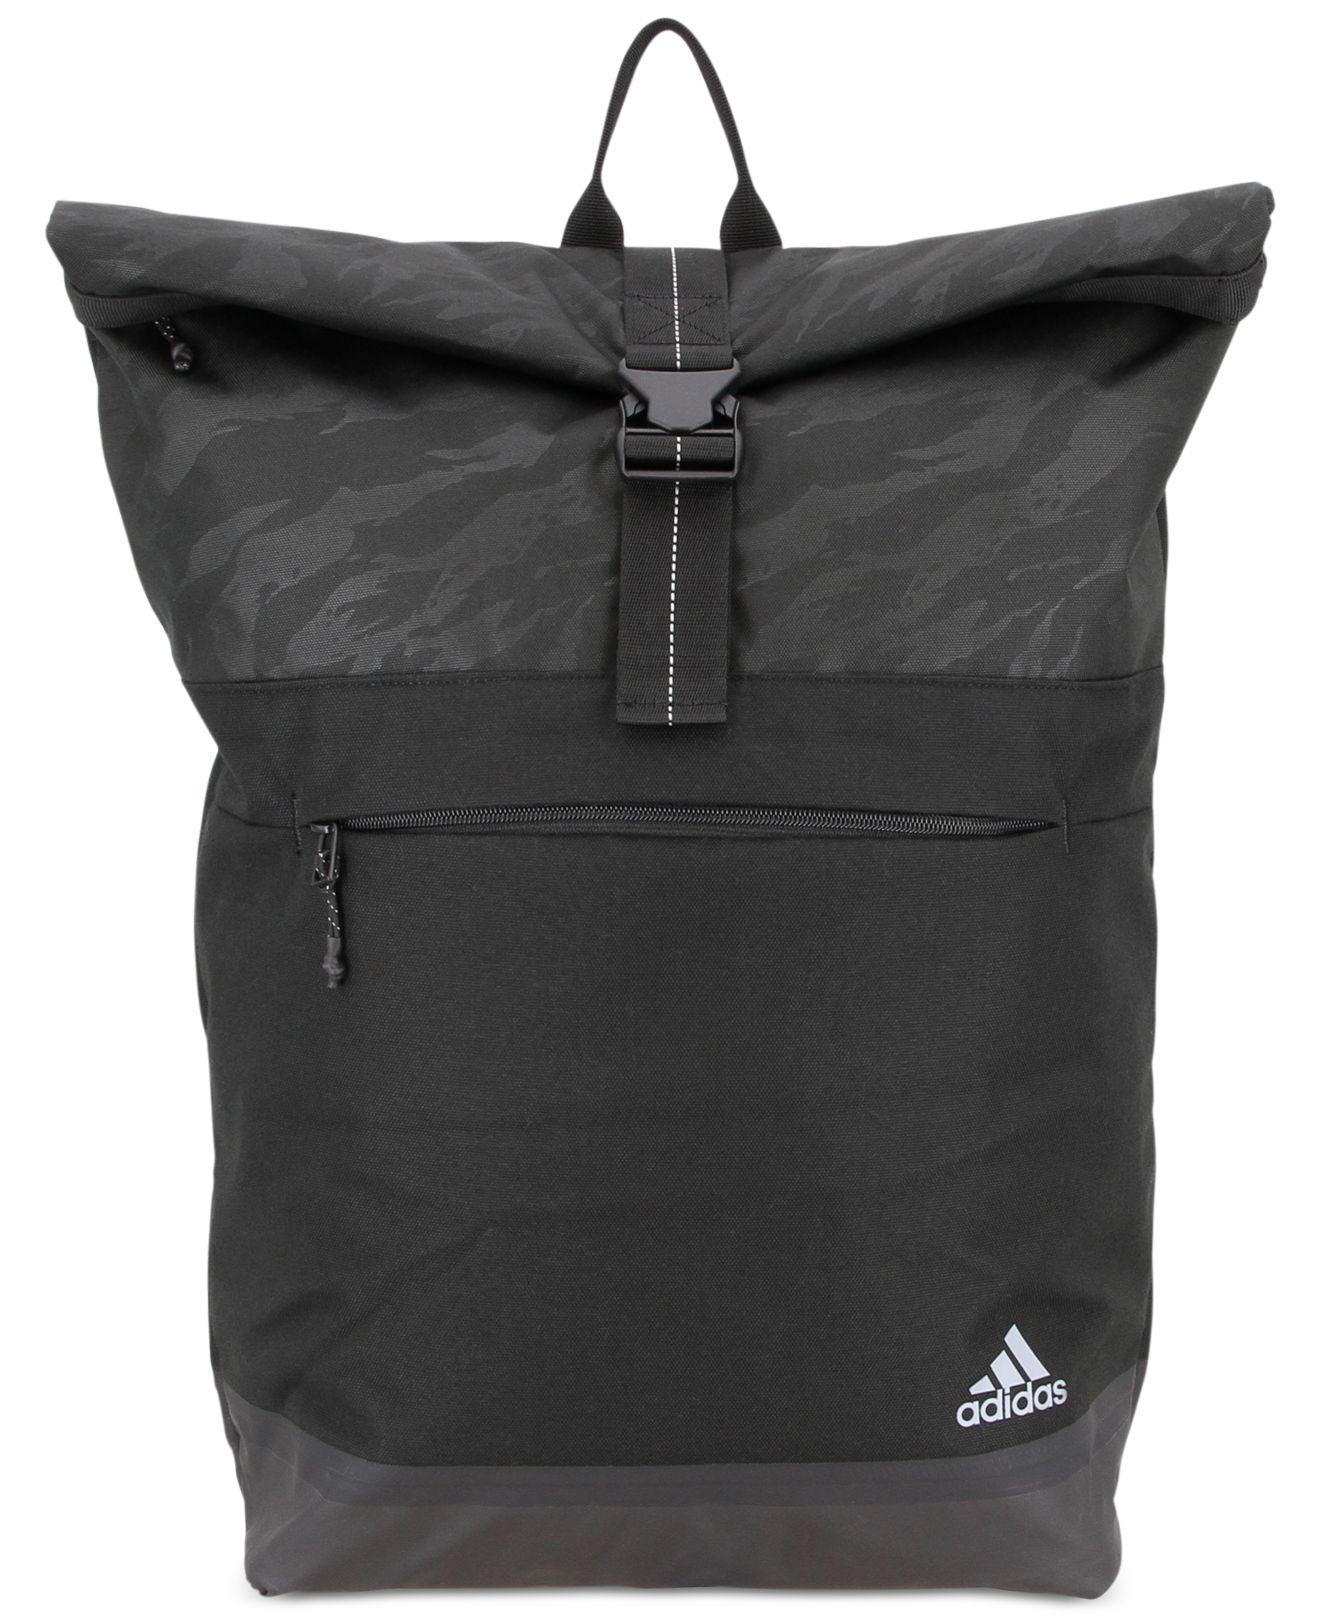 adidas sports backpack